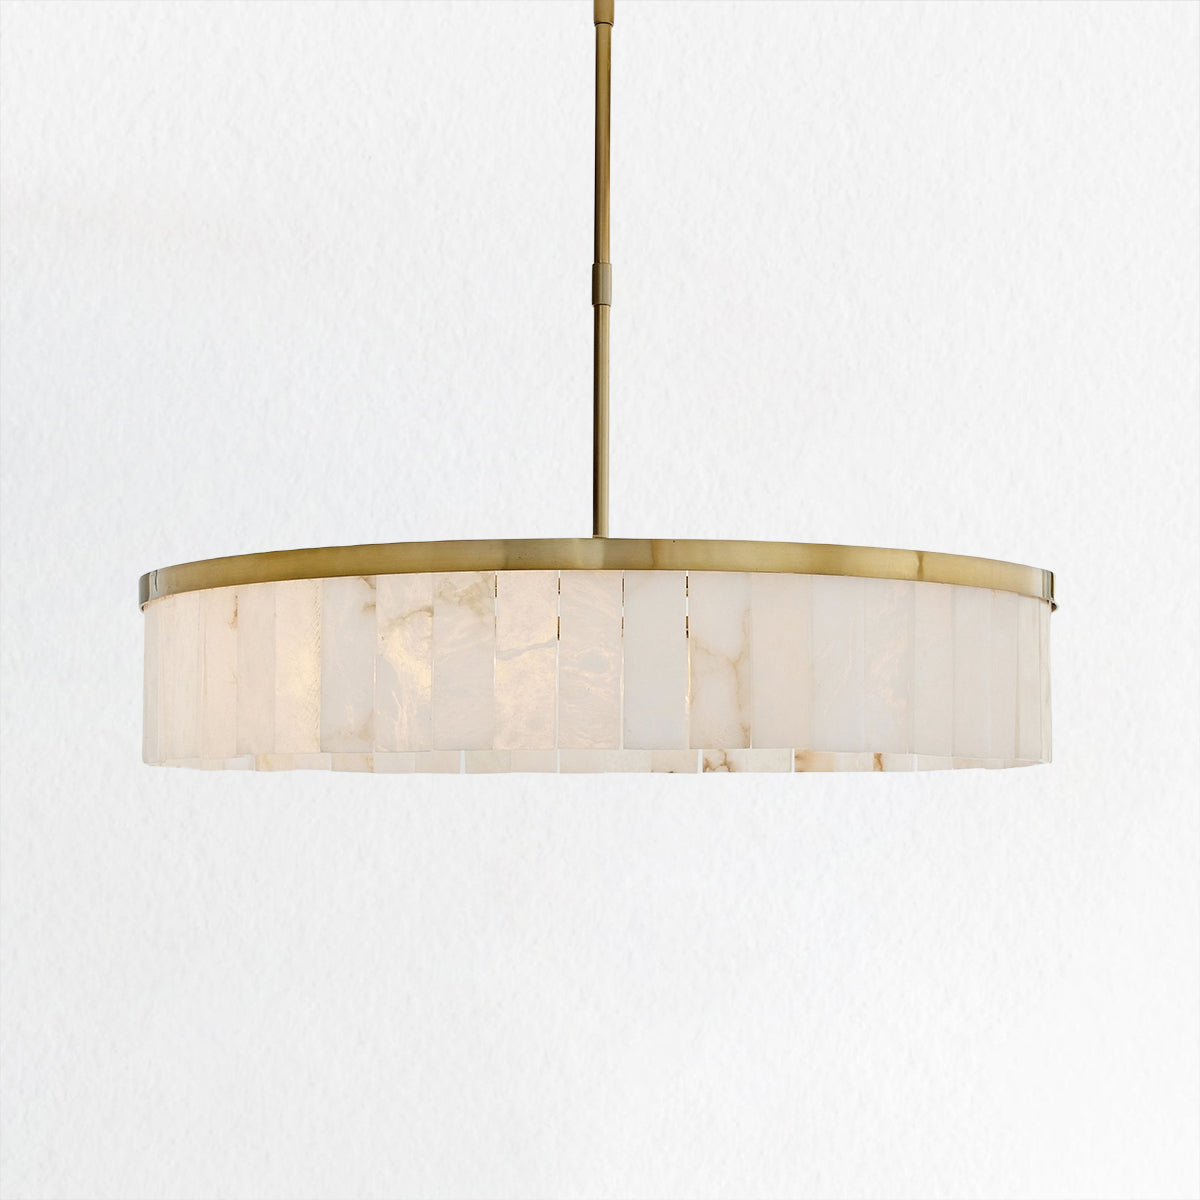 Alabaster Rustic Chandelier - A Modern Living Room Chandelier with Rustic Refinement and Iron Frame Featuring Alabaster Tiles - Perfect Hanging Light Fixture for Your Living Room